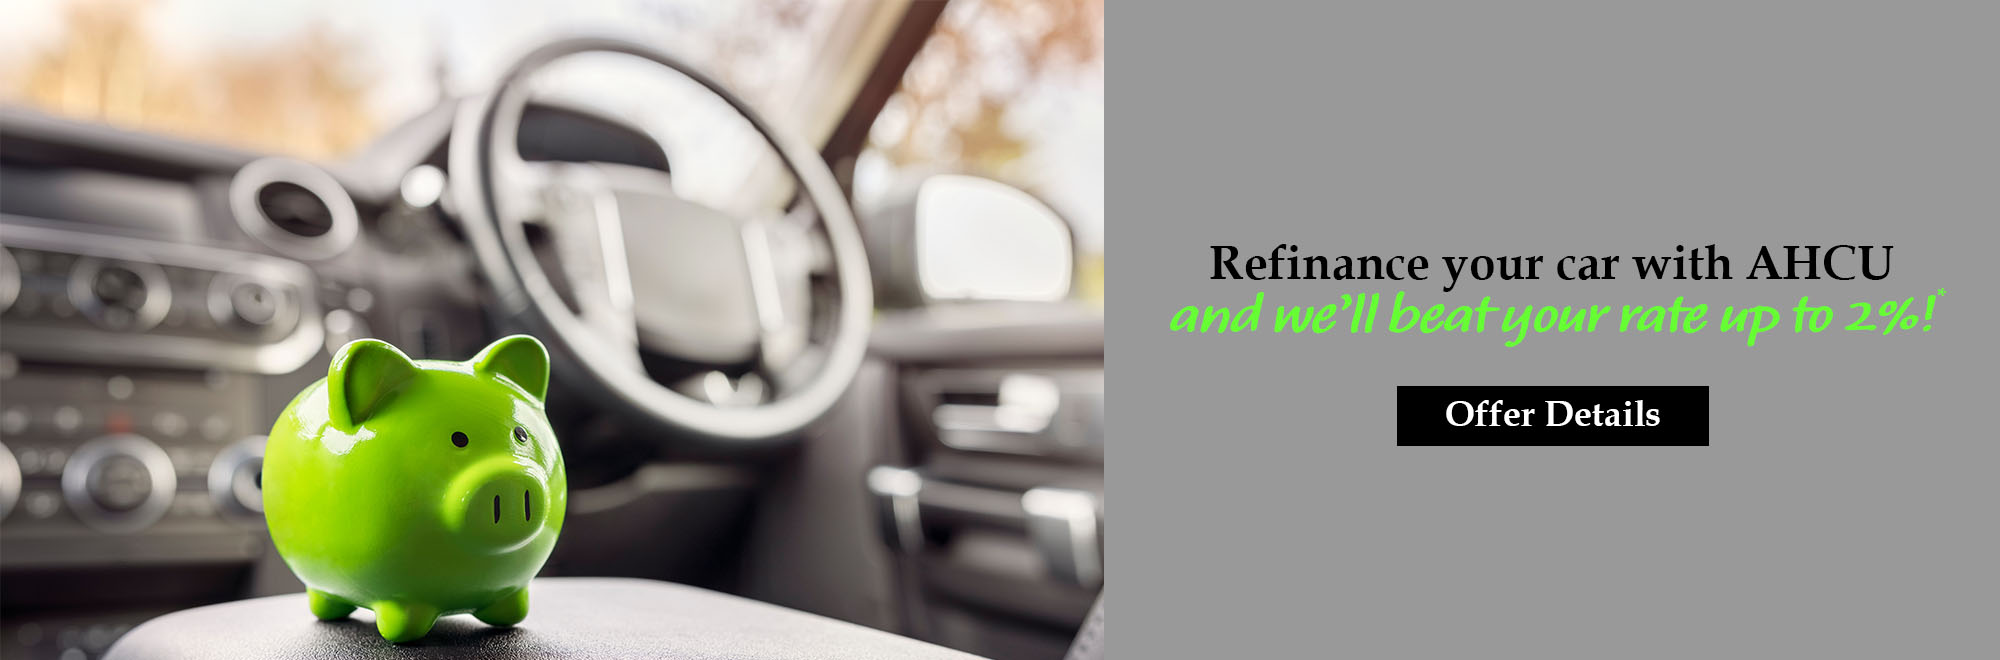 Refinance your car with AHCU and we'll beat your rate by up to 2%. Offer Details